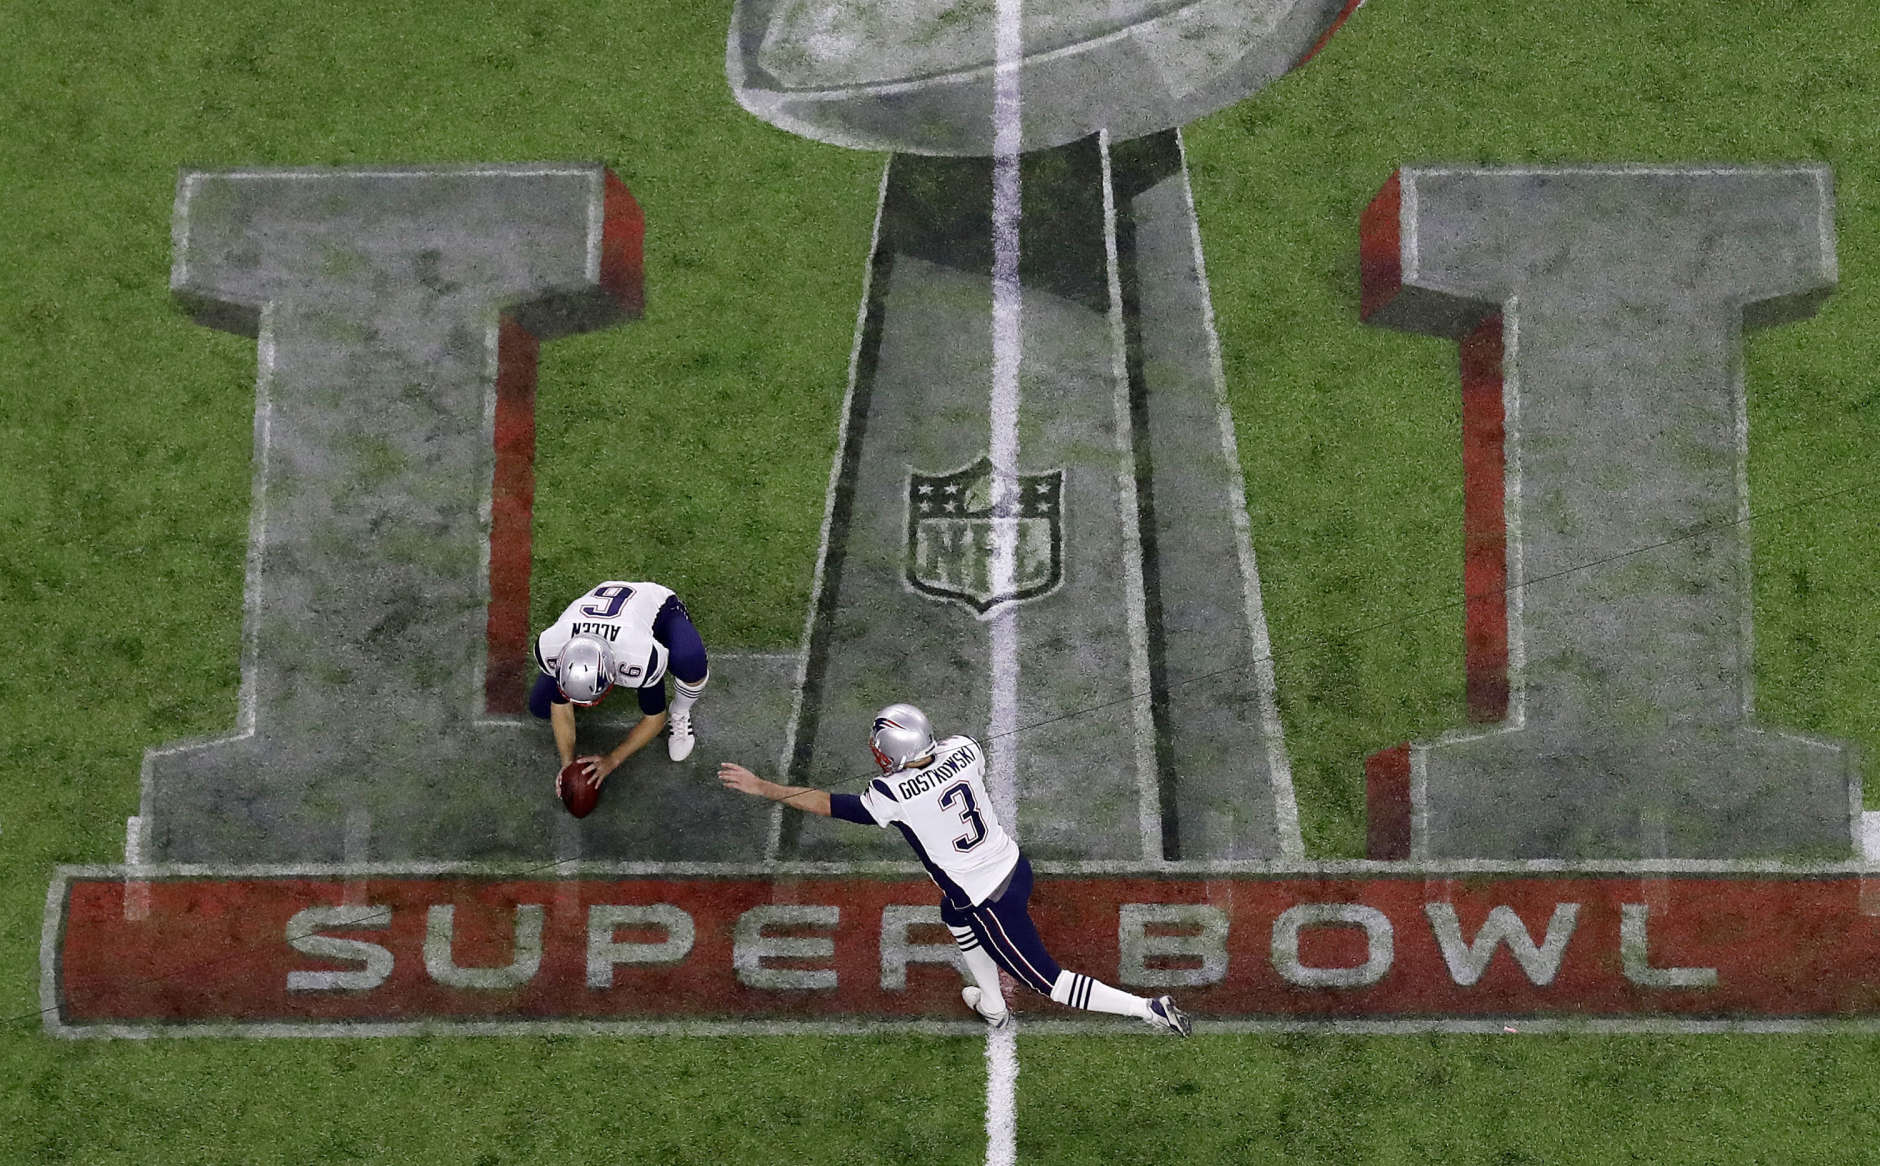 New England Patriots' Stephen Gostkowski attempts a field goal against the Atlanta Falcons during the second half of the NFL Super Bowl 51 football game Sunday, Feb. 5, 2017, in Houston. (AP Photo/Tim Donnelly)